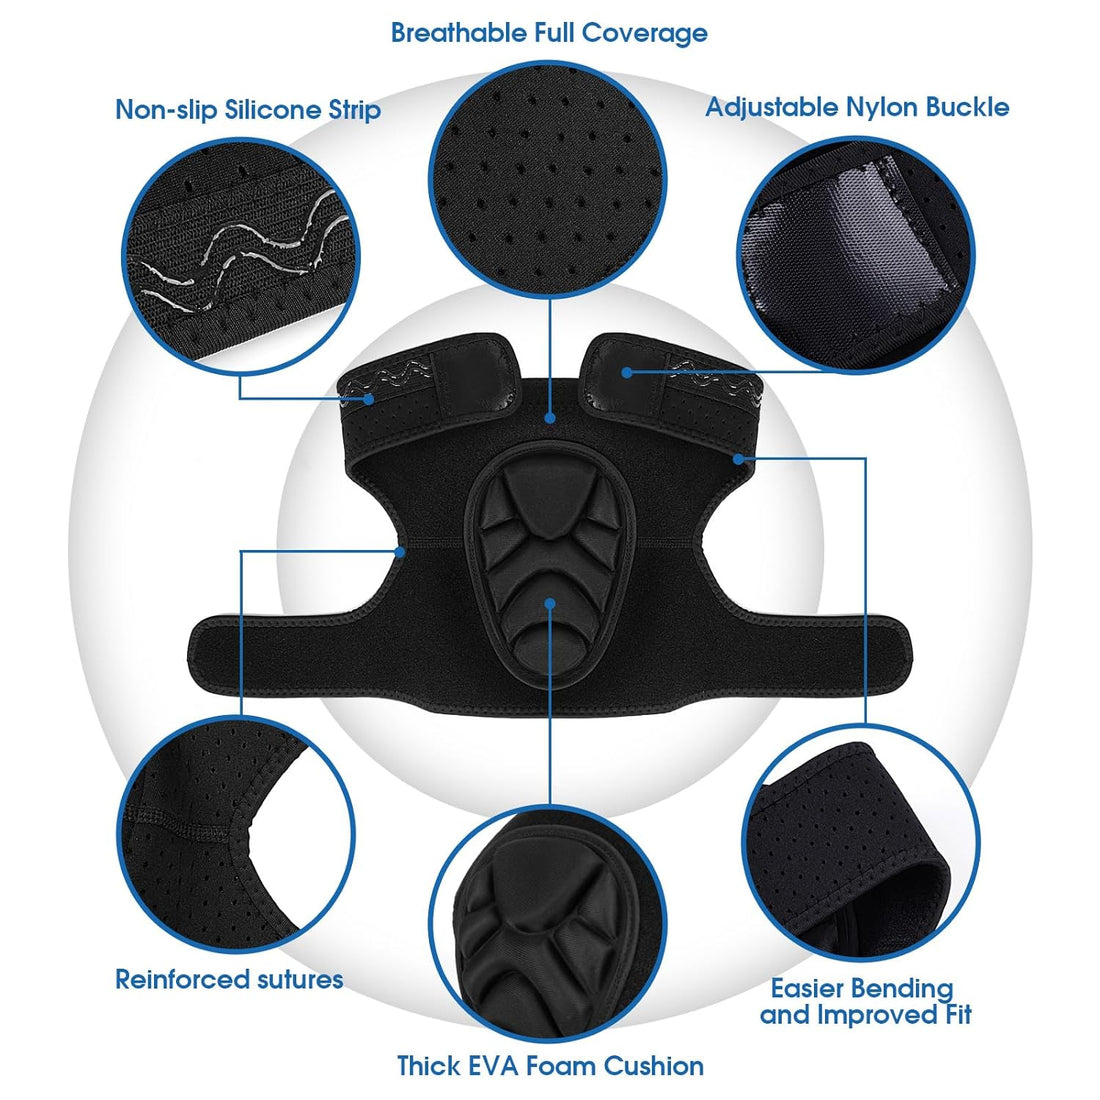 Singahor Knee Pads for Garden, Thick EVA Foam, House Working, Soft Breathable Knee Brace for Men Women Work, Sports, Gardening Maintain (X-Large)